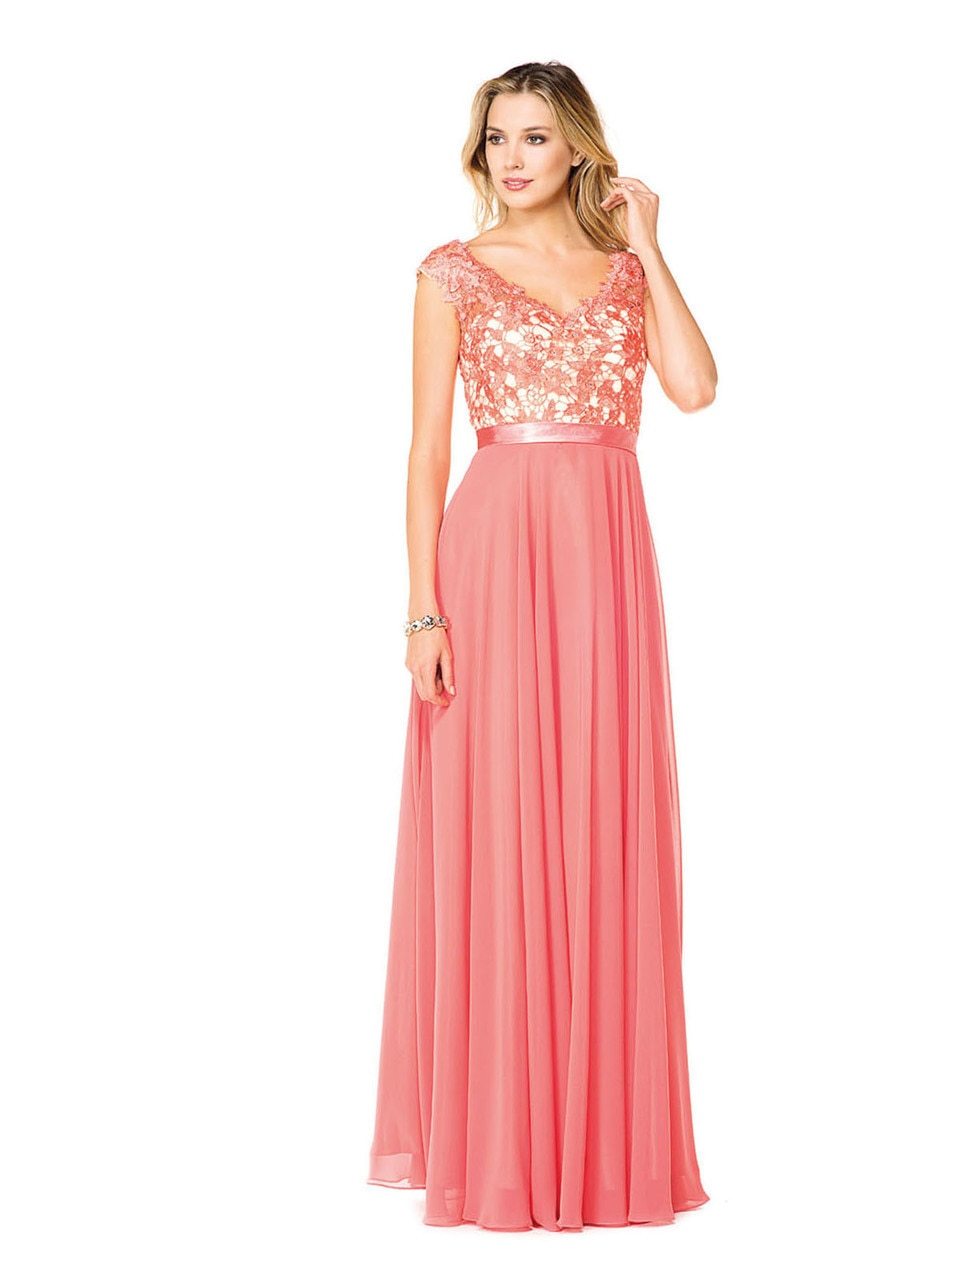 Glow by Colors - G318 V Neck Beaded Lace Chiffon Formal Dress In Orange